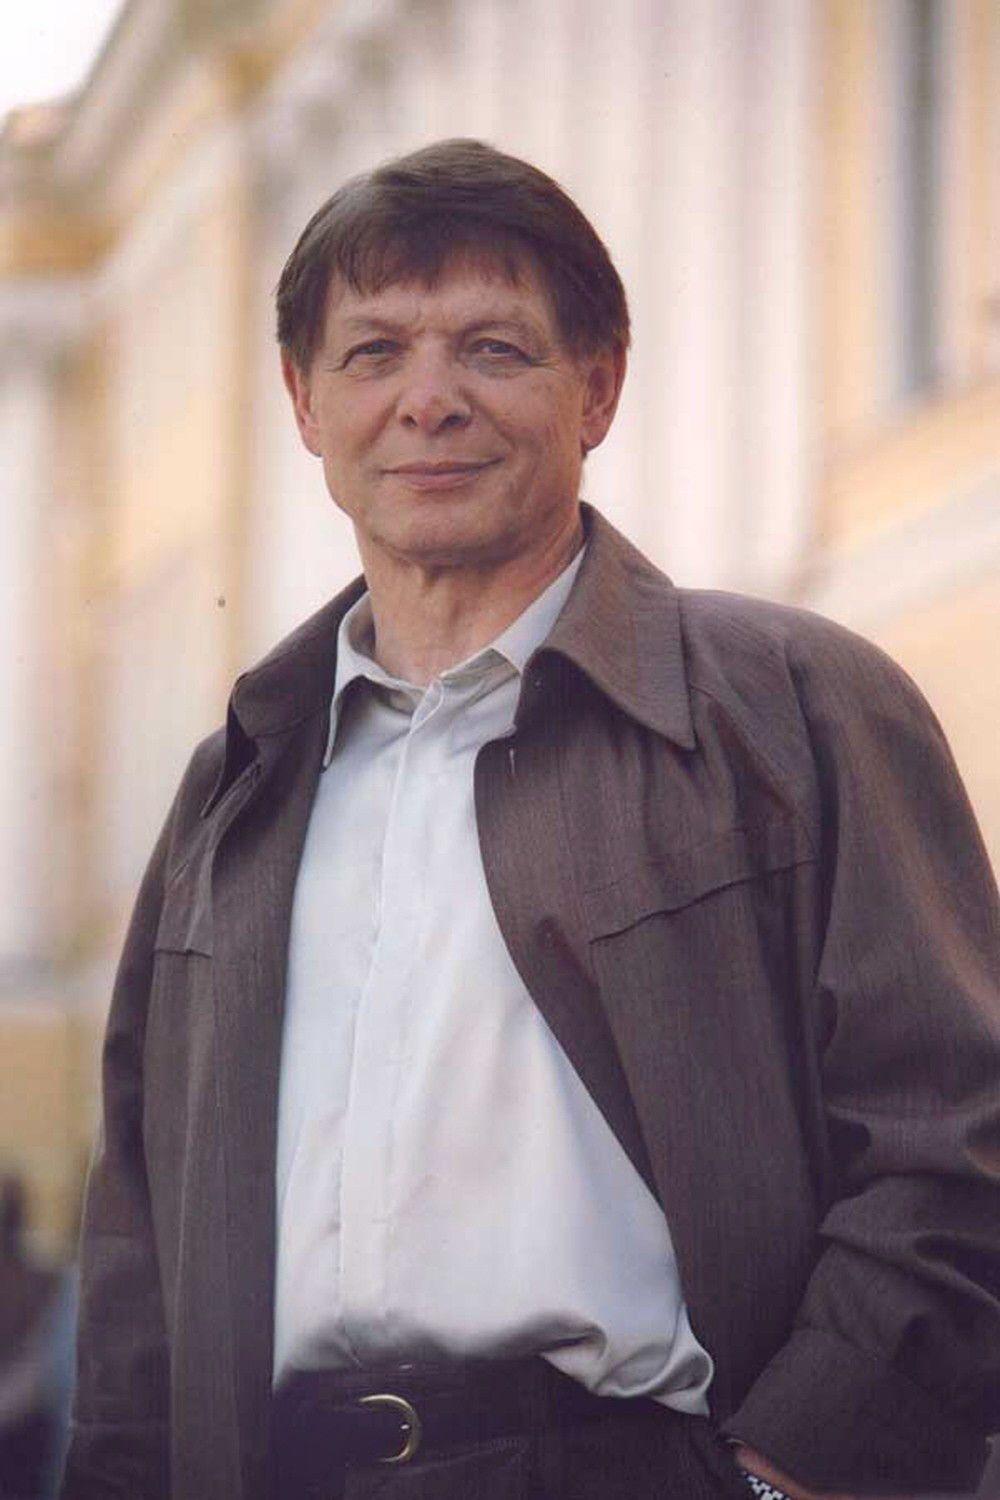 Eduard Khil. Voices from Russia